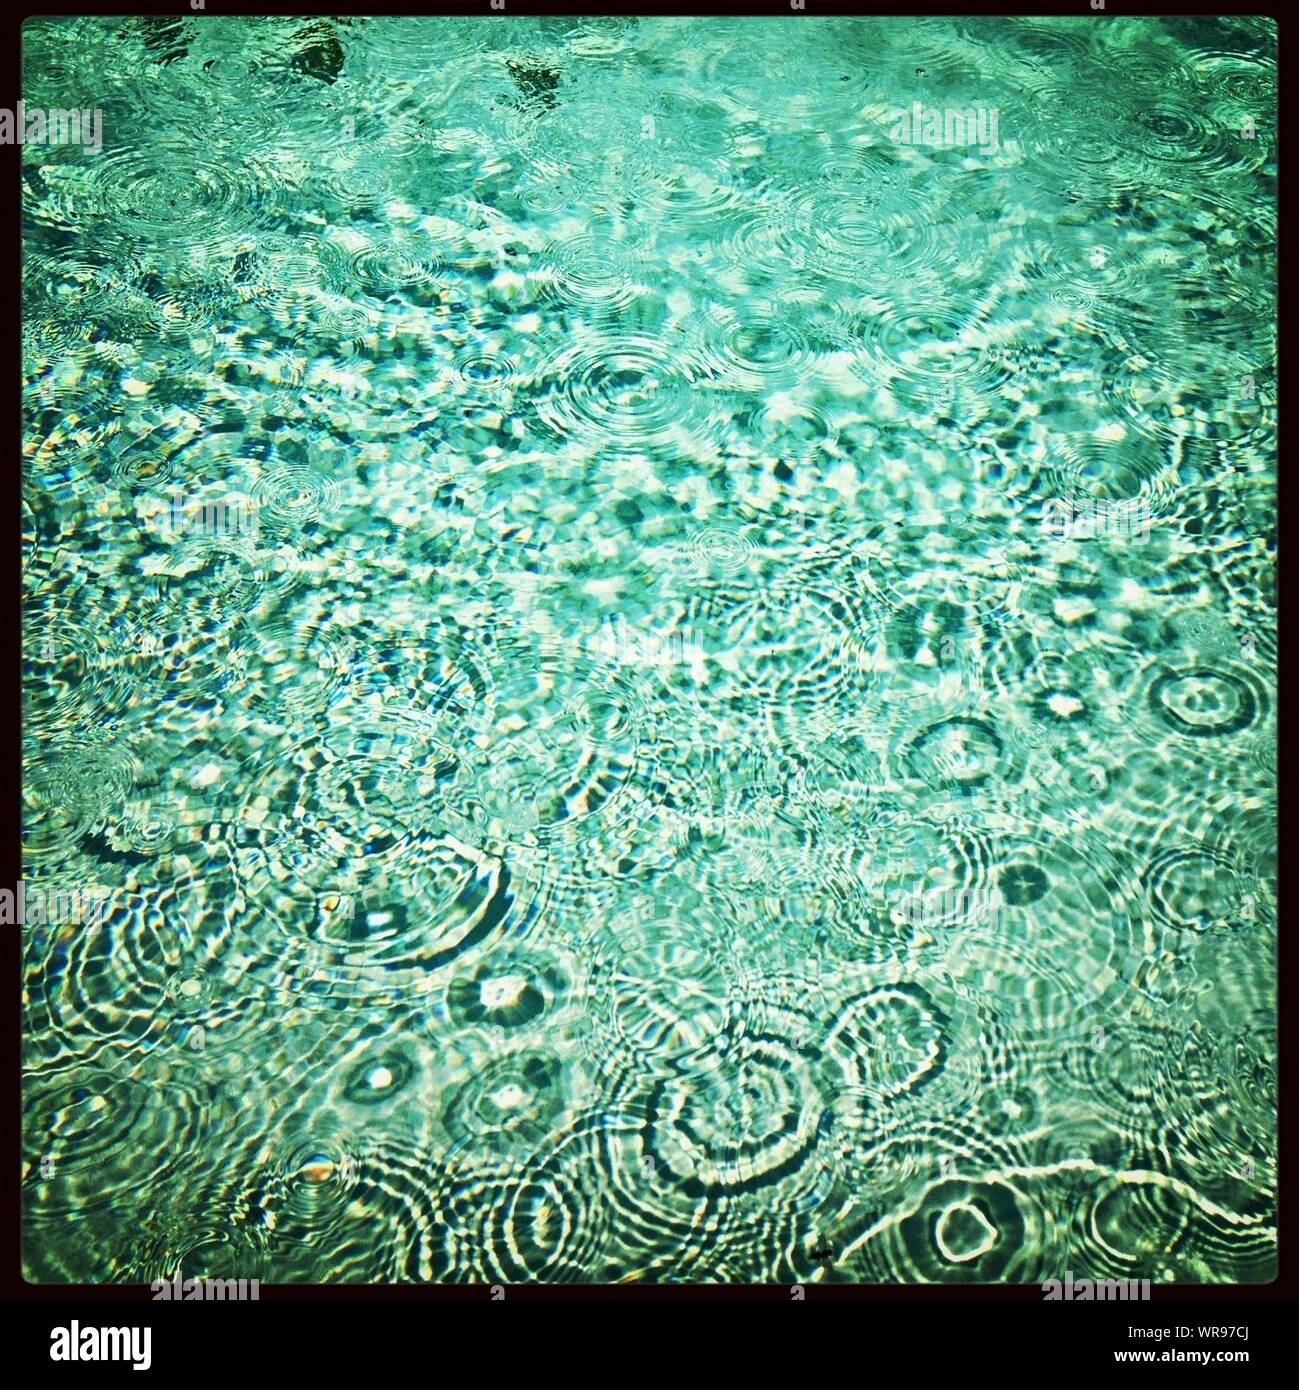 Close-up Of Natural Patterns In Water Stock Photo